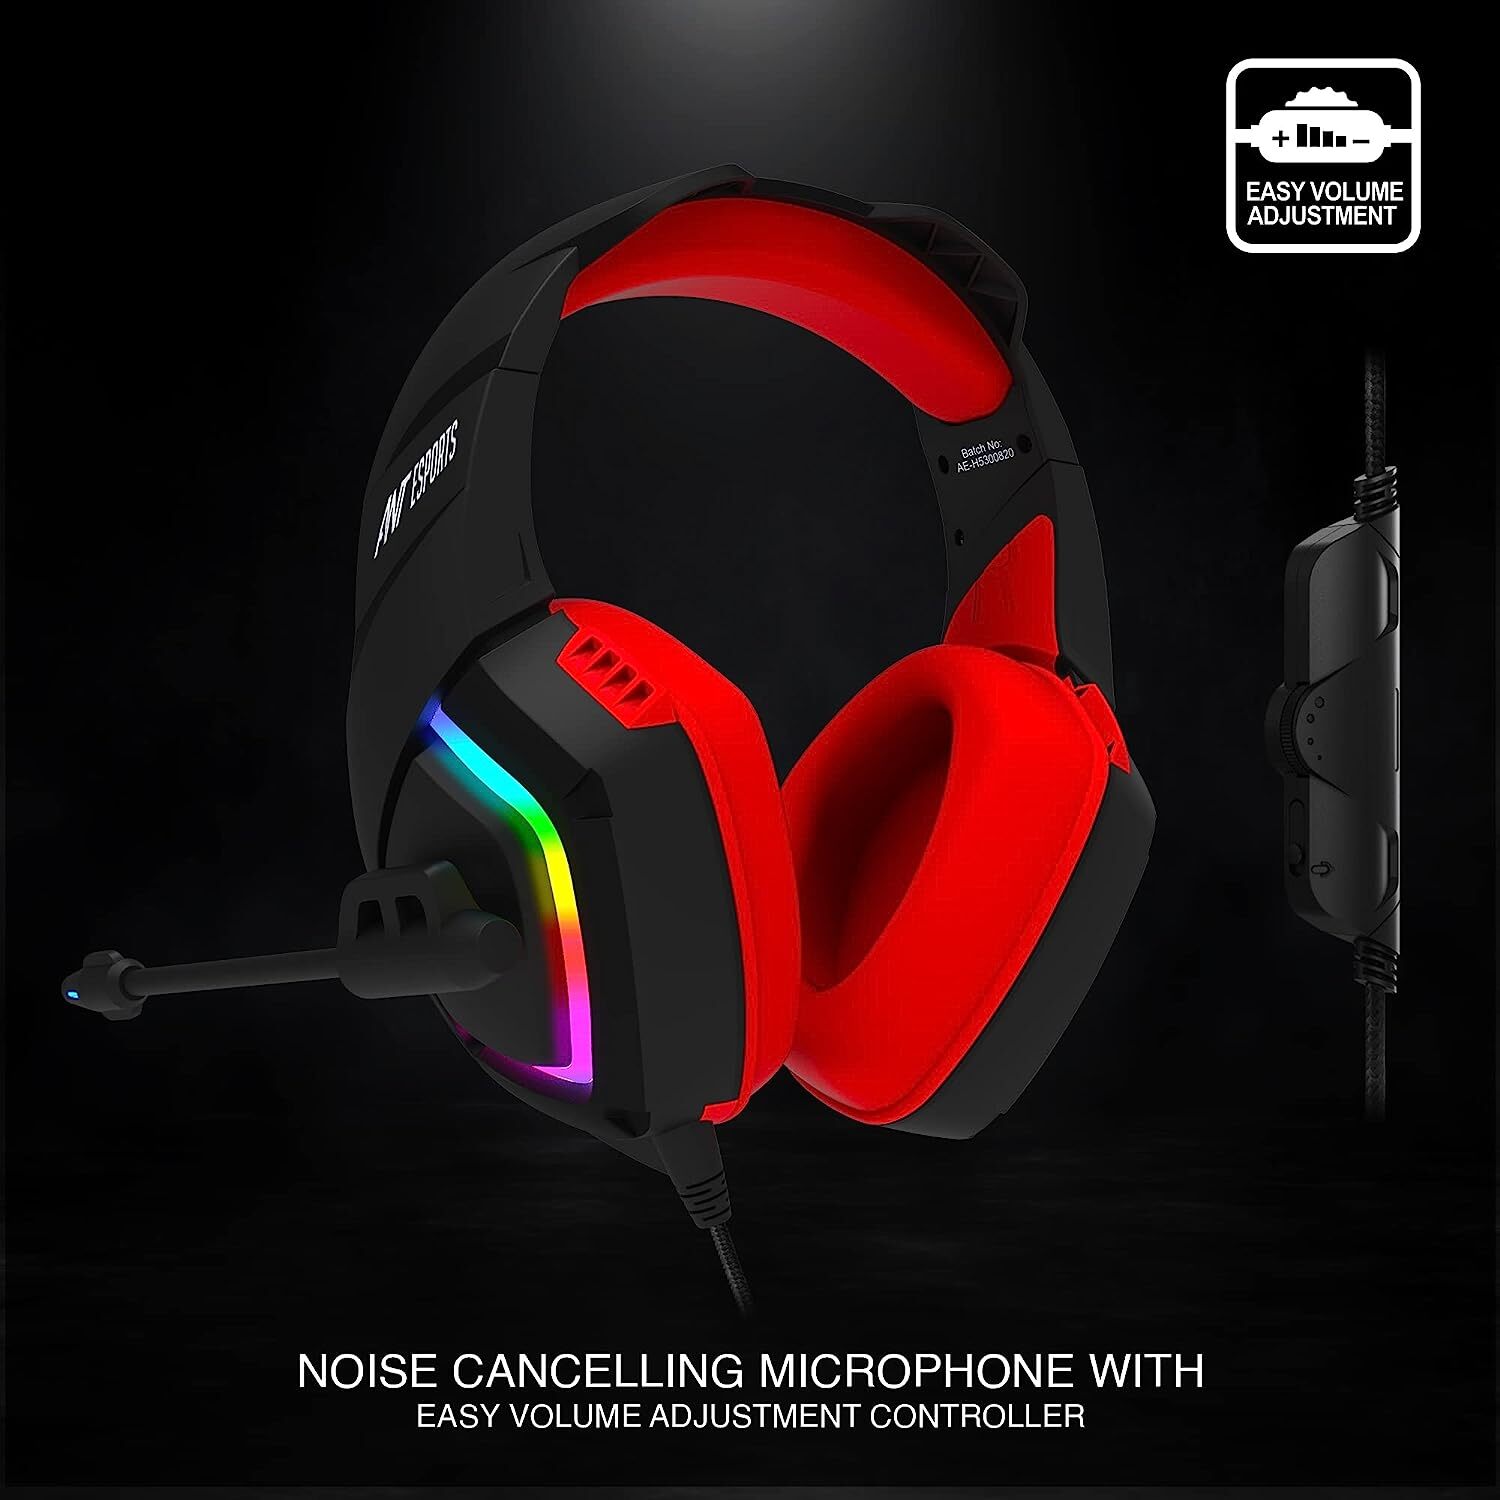 Ant Esports H530 Multi-Platform Pro RGB Gaming Headsetfor PC / PS4 / PS5 / Xbox One / Switch1 with mic, Black Red